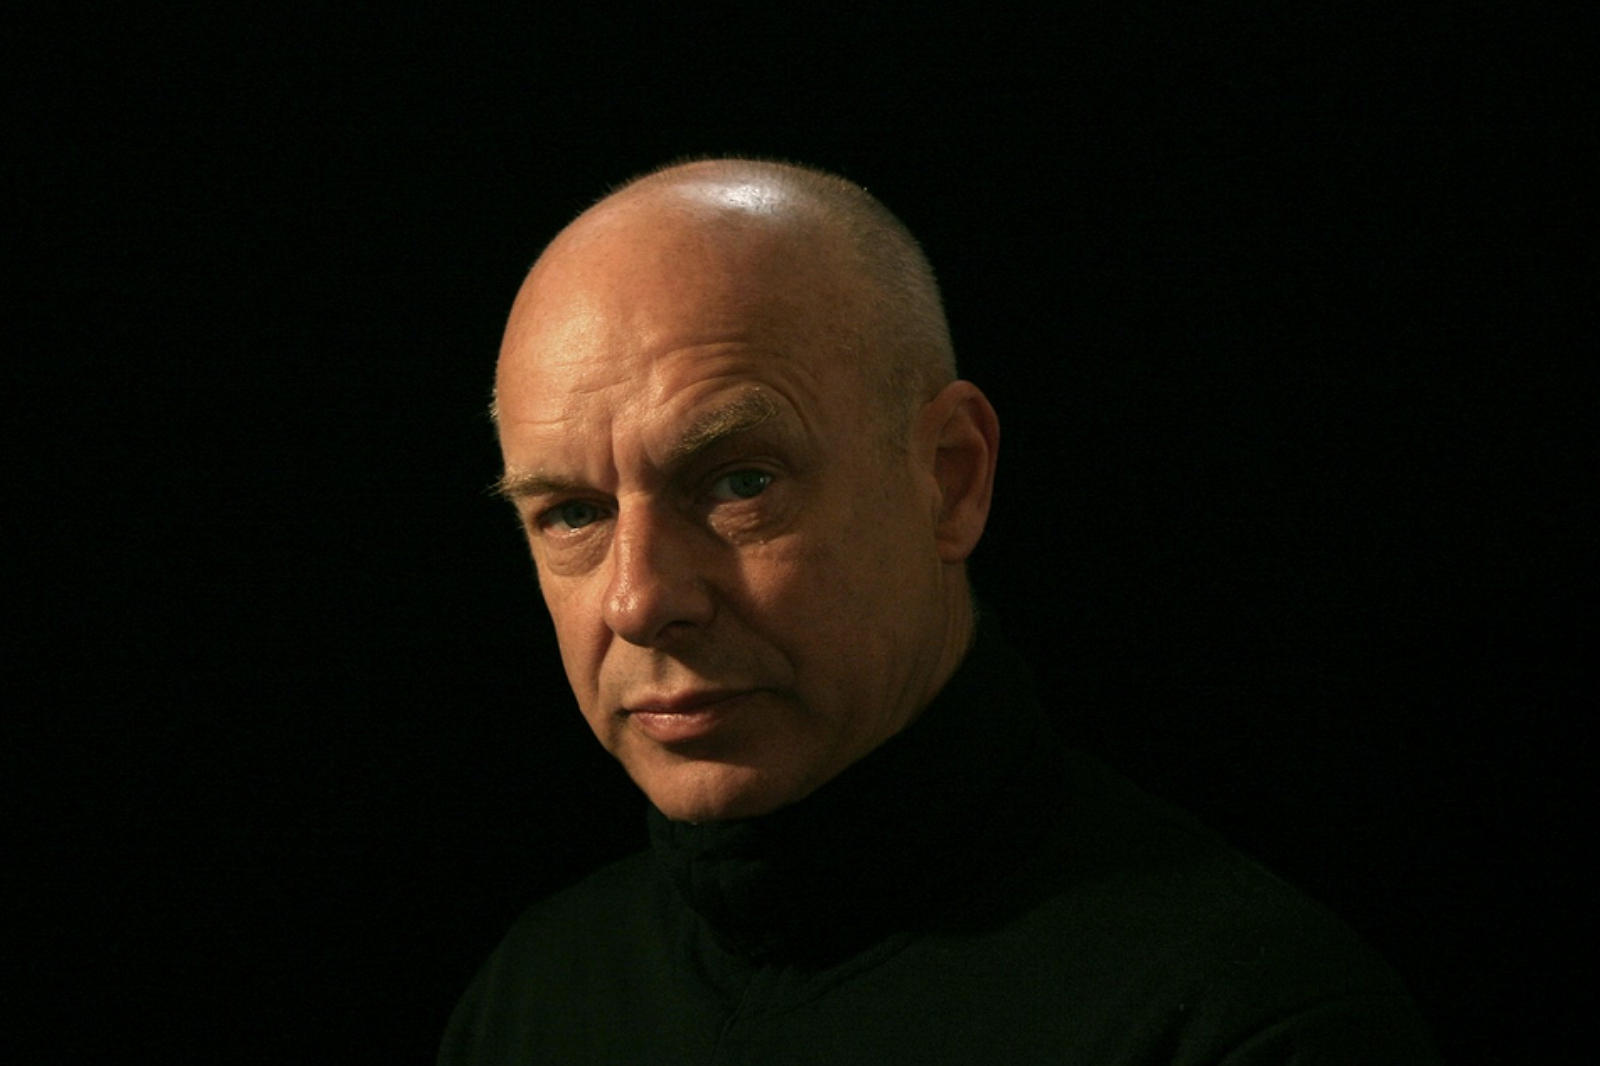 Brian Eno is urging Britain to remain in the European Union